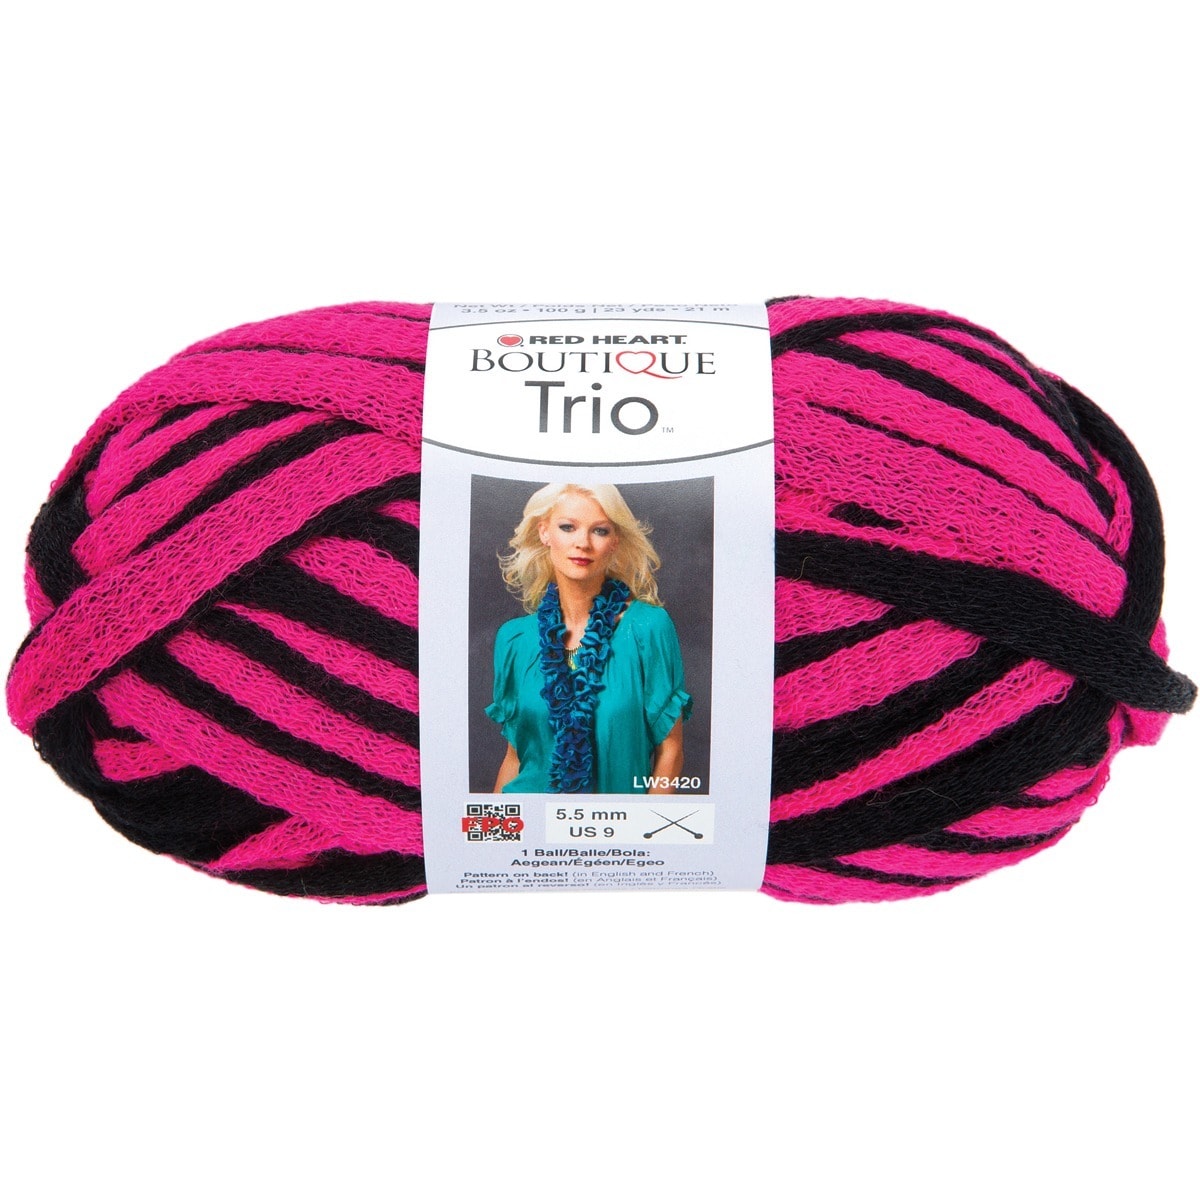 Red Heart 'With Love' Yarn - Bed Bath & Beyond - 8540491